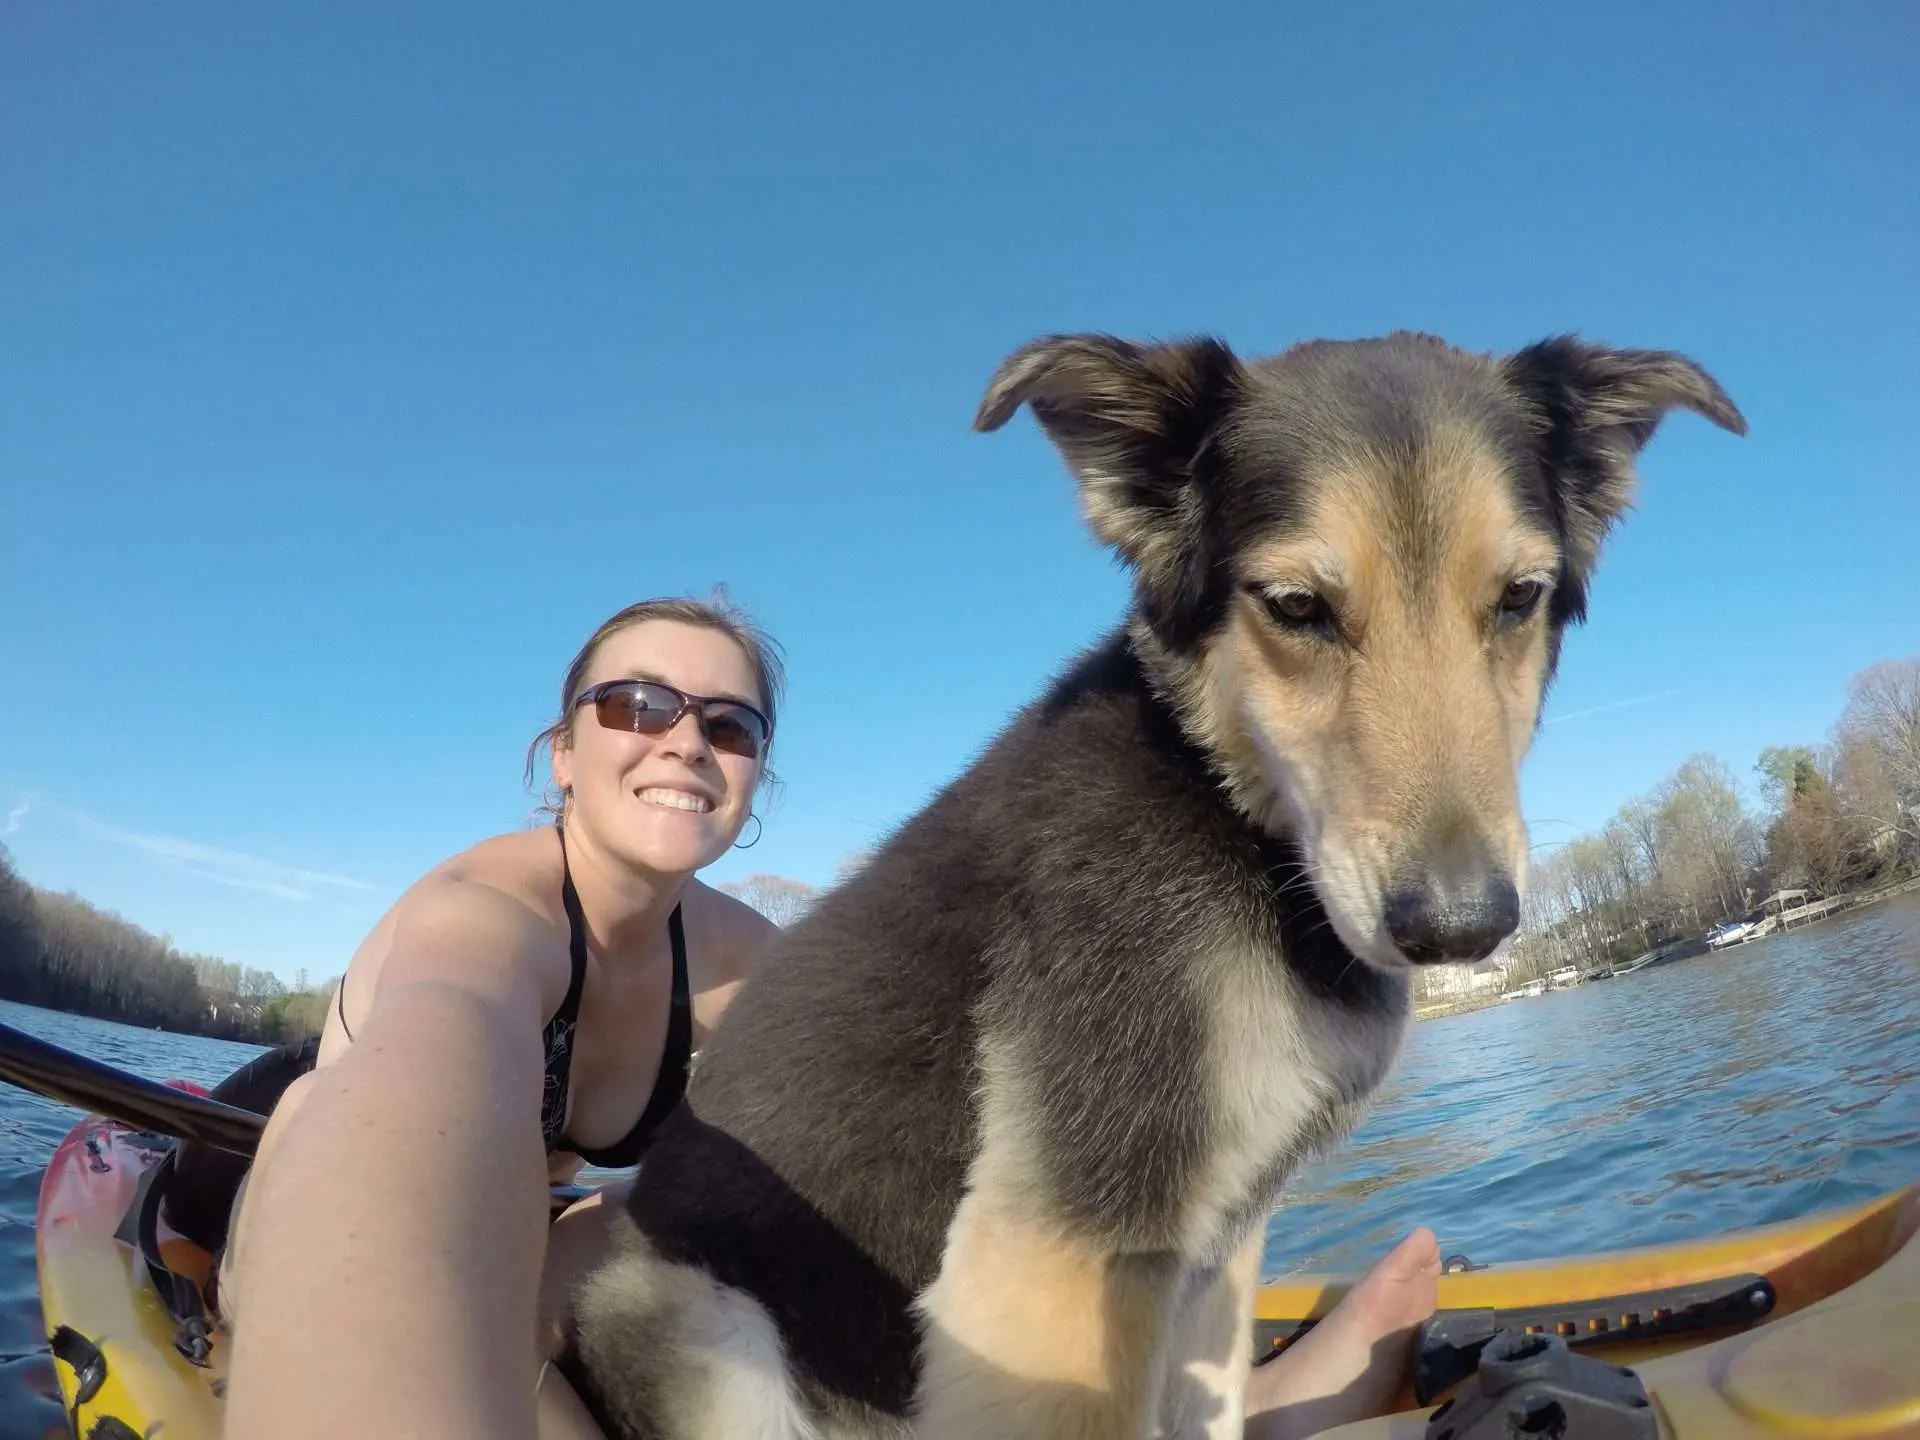 Caitlin from Mortons on the Move kayaking with her dog